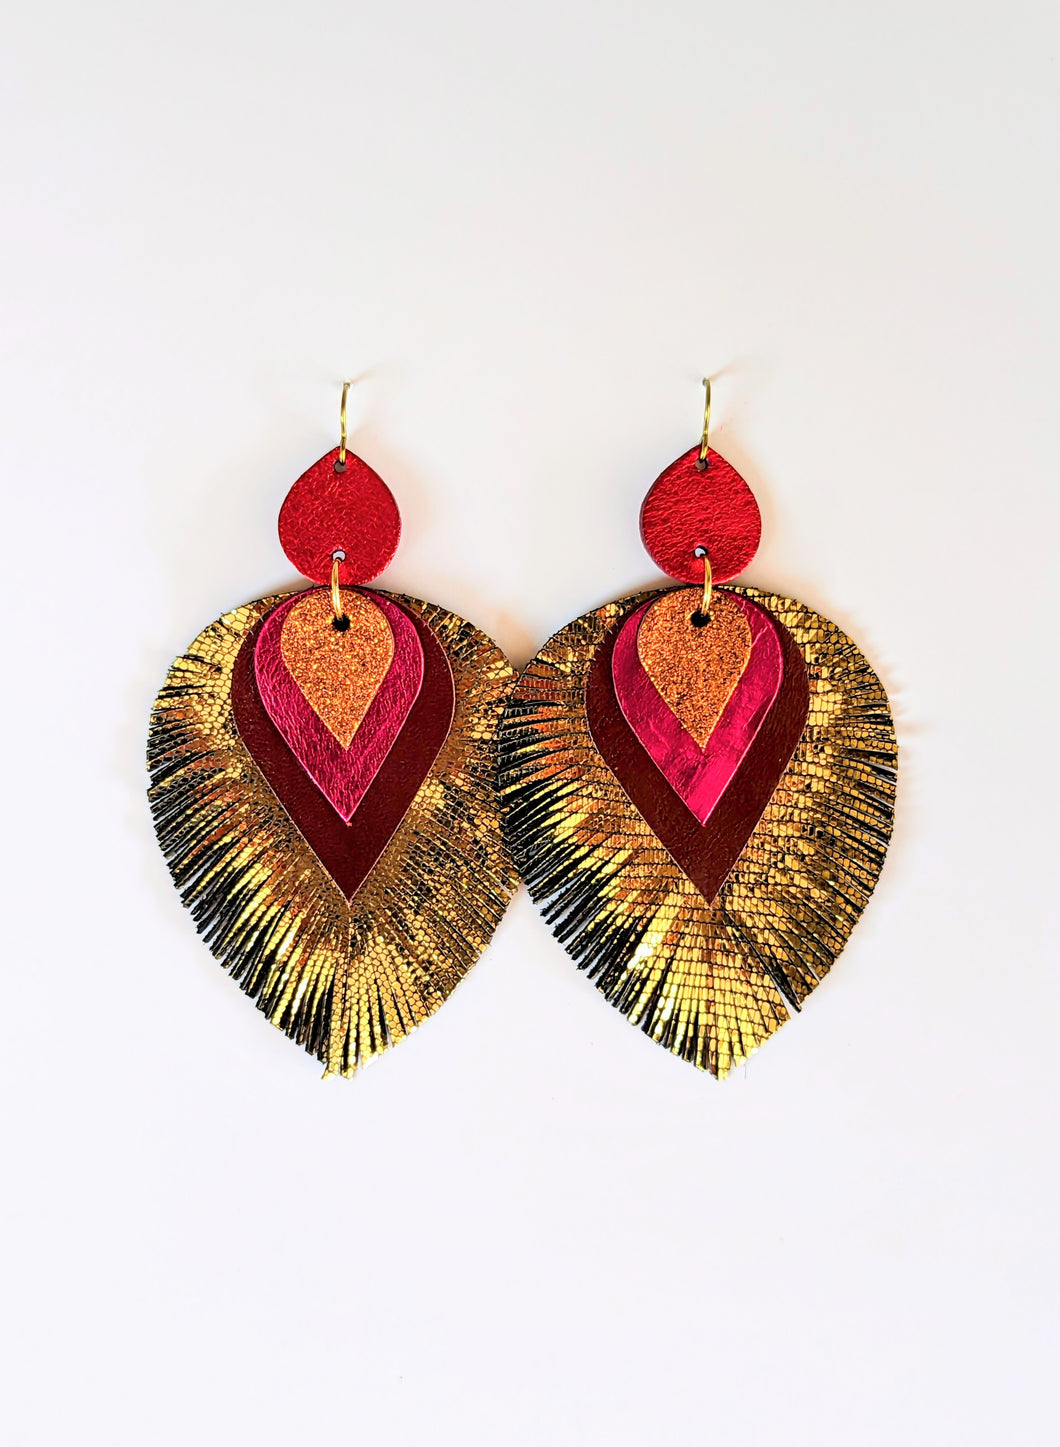 Merry and Bright Statement Earrings